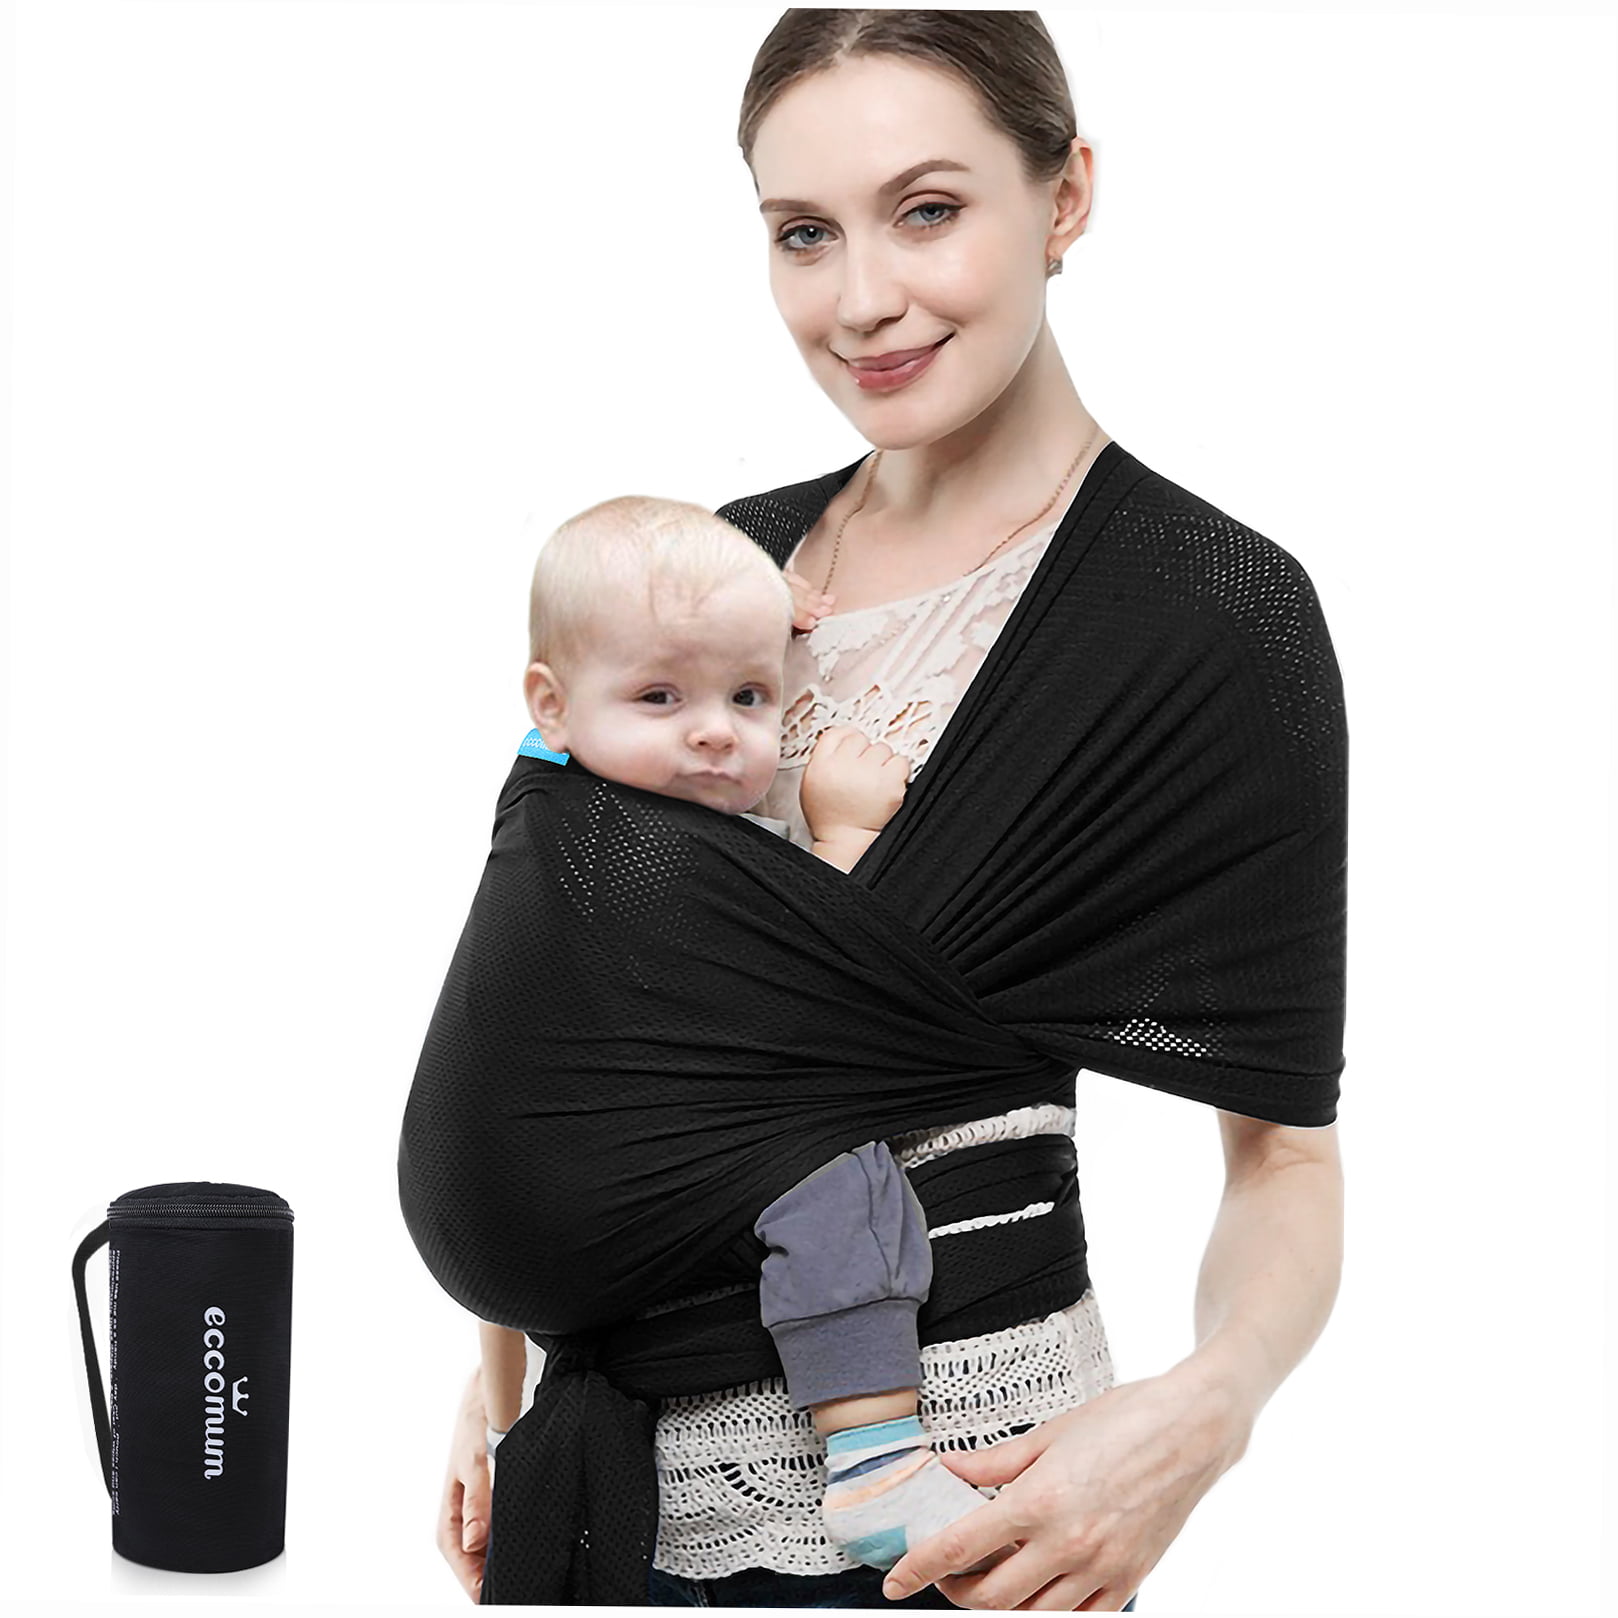 for Infants & Babies 4 Color Options Natural & Breathable My Honey Wrap Lightweight Baby Carrier Sling